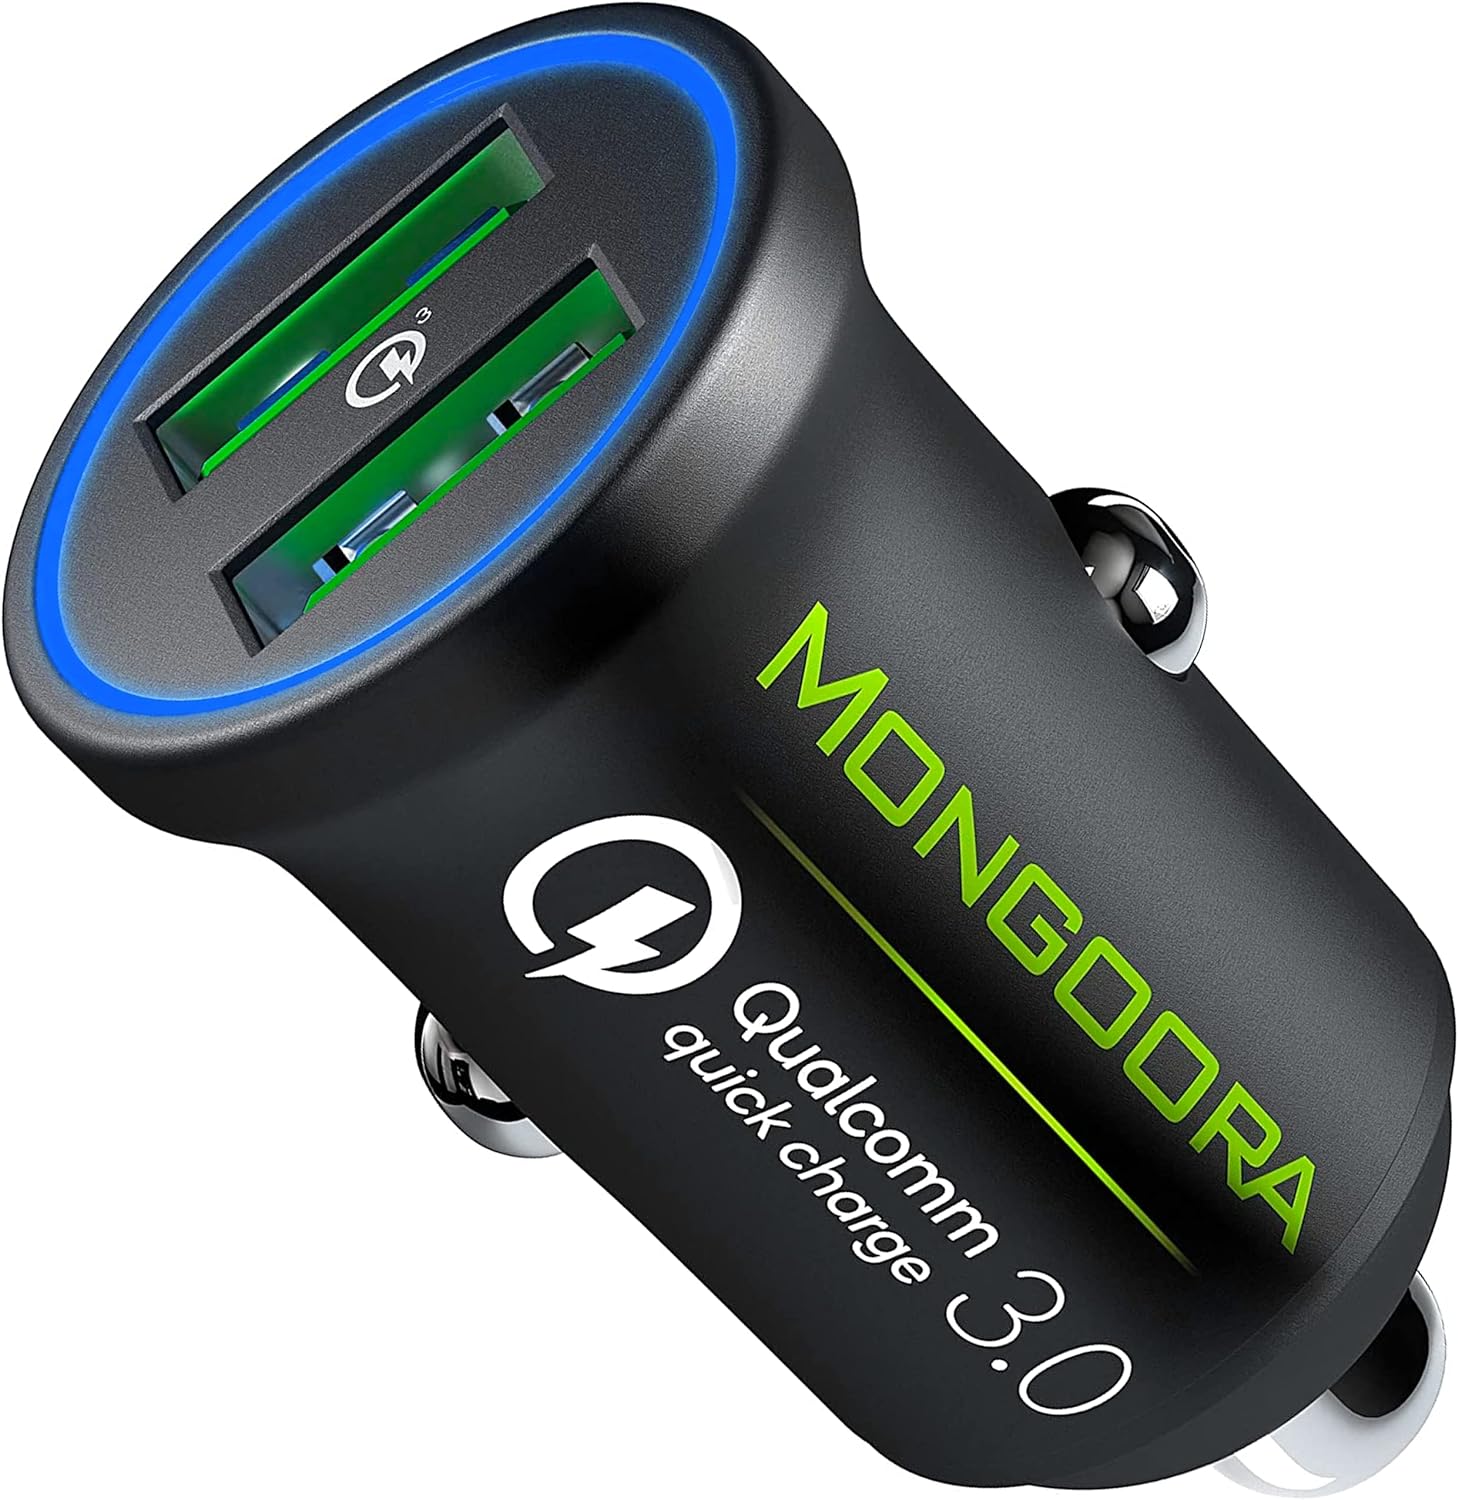 I wanted to replace my older 2.1 dual USB charger with a more powerful version for mobile charging of a new drone. Enter the Mongoora Qualcom Quick Charge 3.0 Dual USB charger. I was drawn to this unit because of its minimalist design, metal casing, eye-catching lime green charger ports, & the individual Qualcom charger board design. The charger arrived quickly & was nicely packaged & presented.The first thing I noticed about the Mongoora charger is its compact size. It is at least 1/2 shorter 